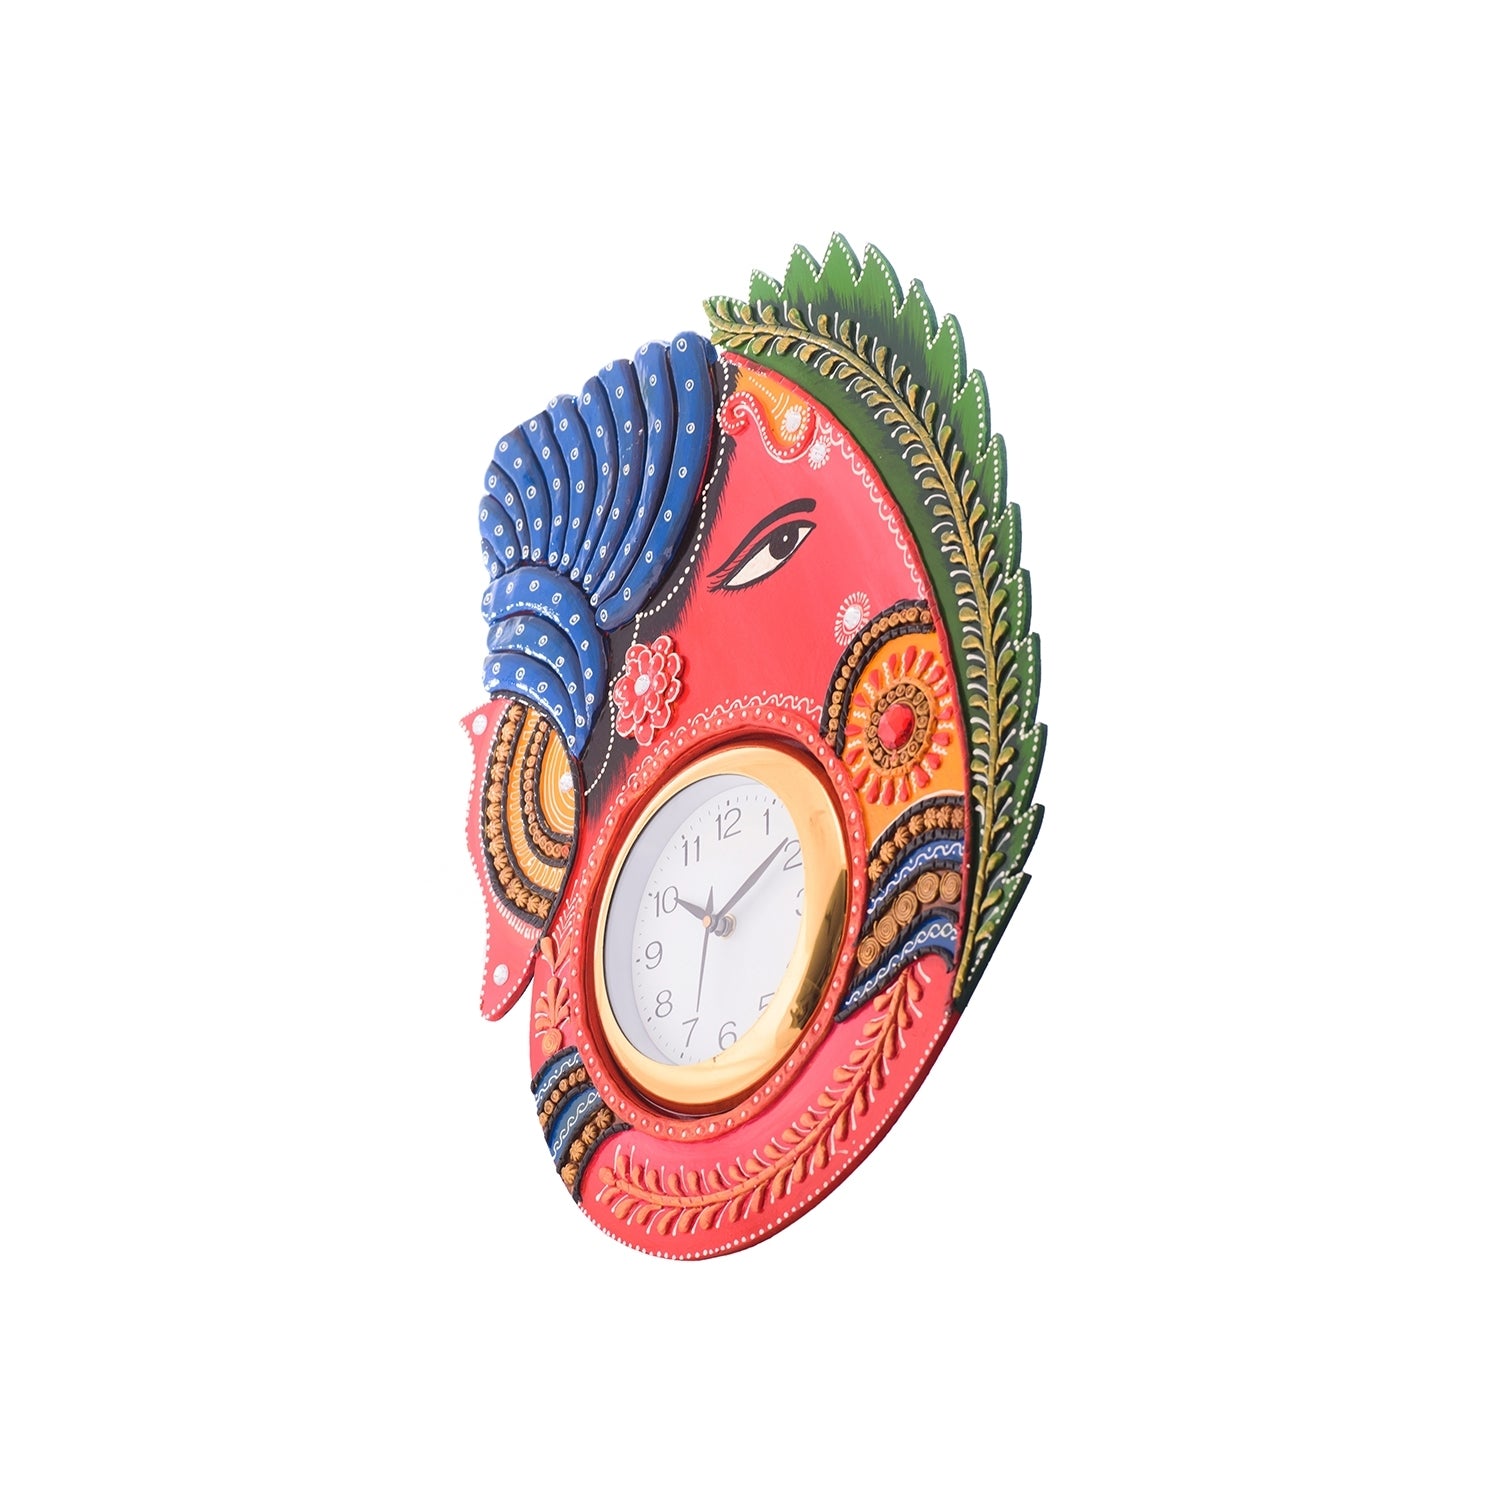 Turban Lord Ganesha Colorful Wooden Handcrafted Wooden Wall Clock (H - 18Inch) 3